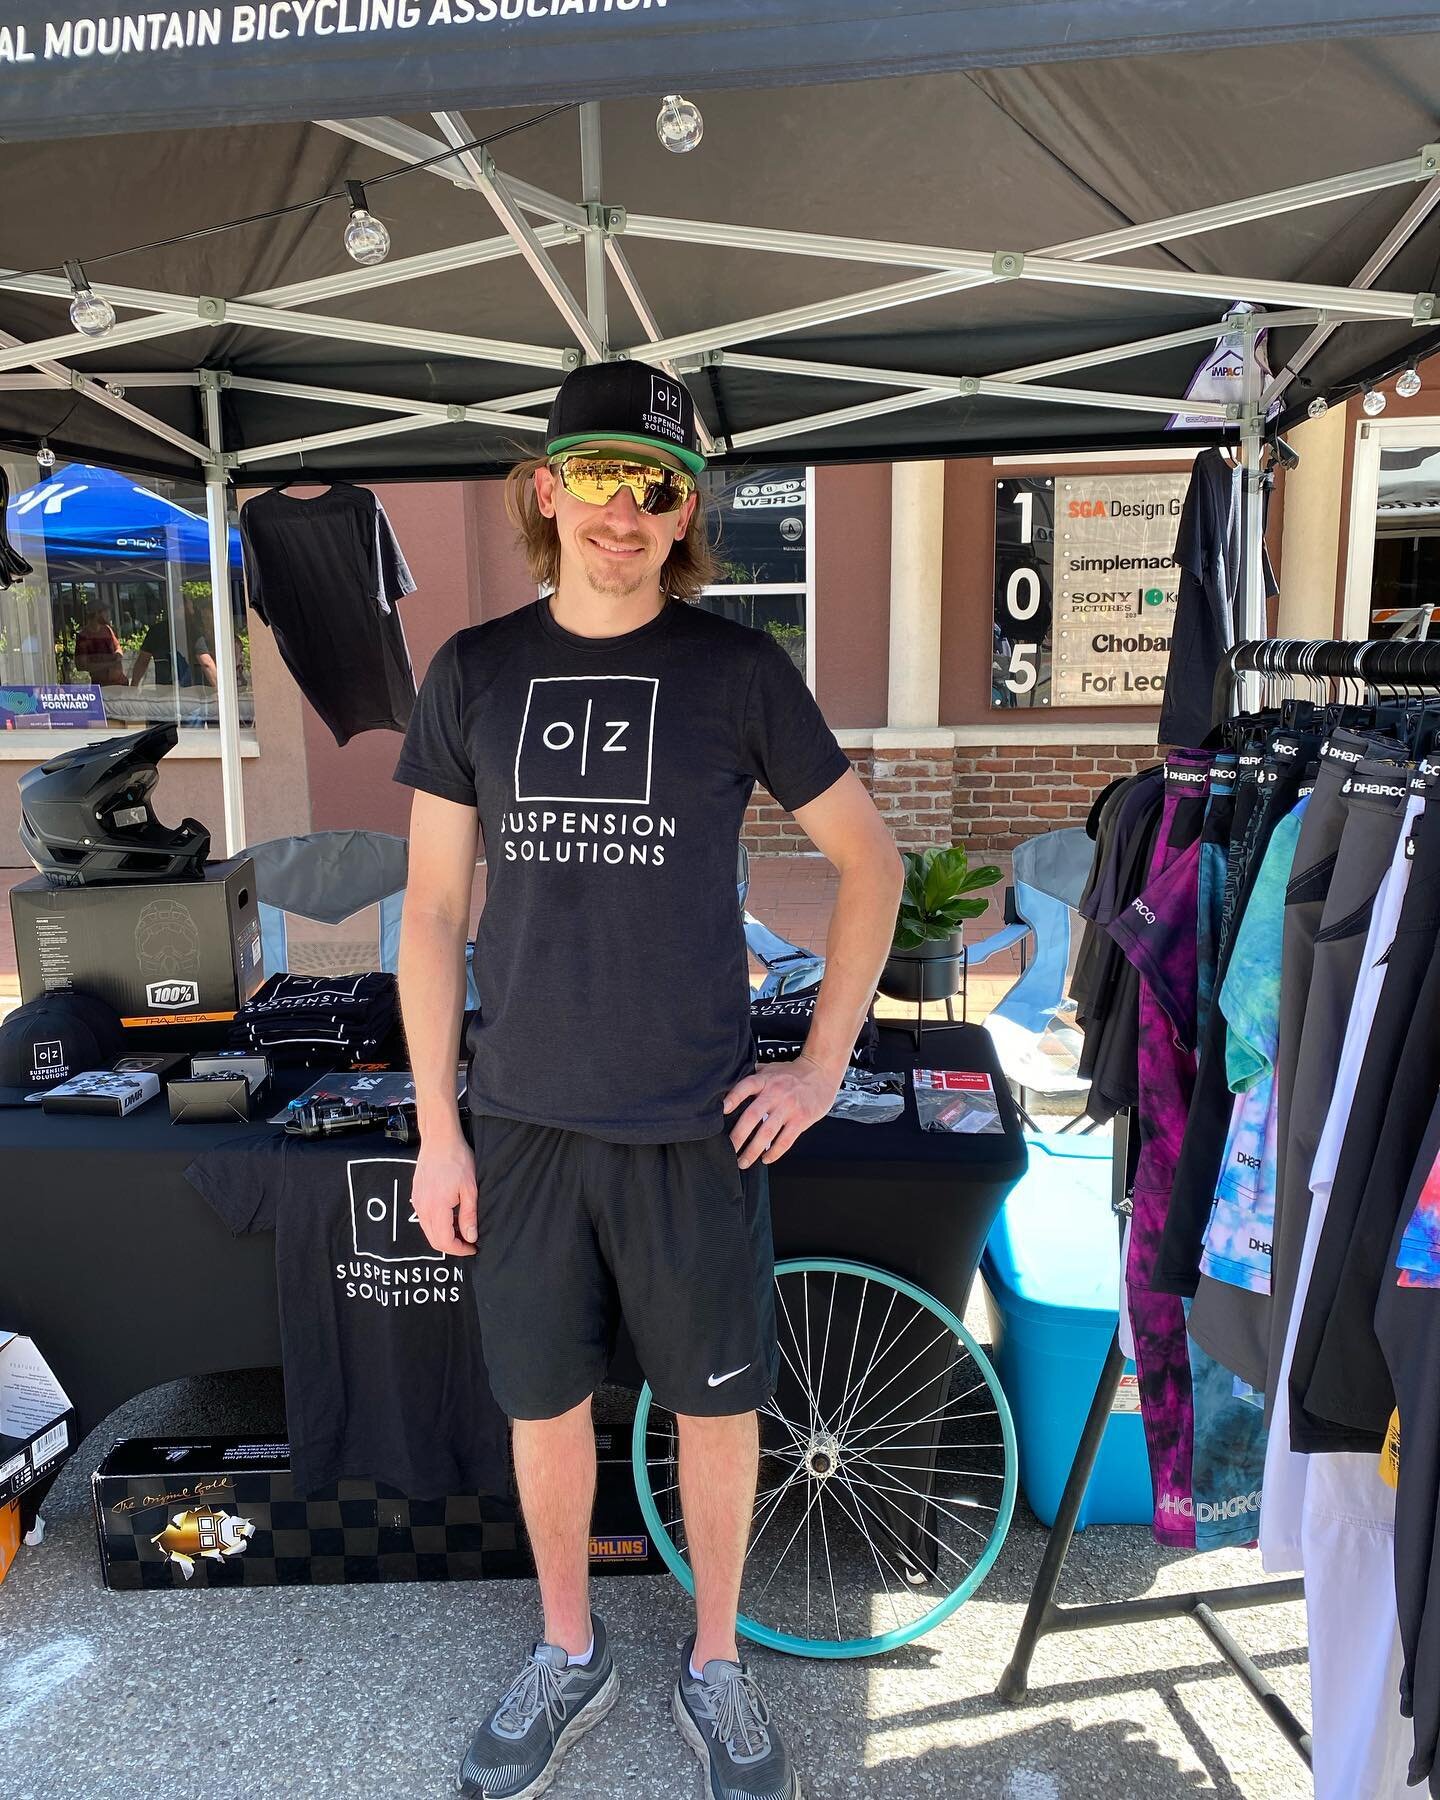 We are out in the wild at First Friday on the square downtown Bentonville! Come talk about bike stuff with Dylan and sign up for our Mid Season Giveaway!!!! See ya soon!!!!
#downtownbentonville #dharcoclothing #revelrider #mtbsuspension #oztrails #oz